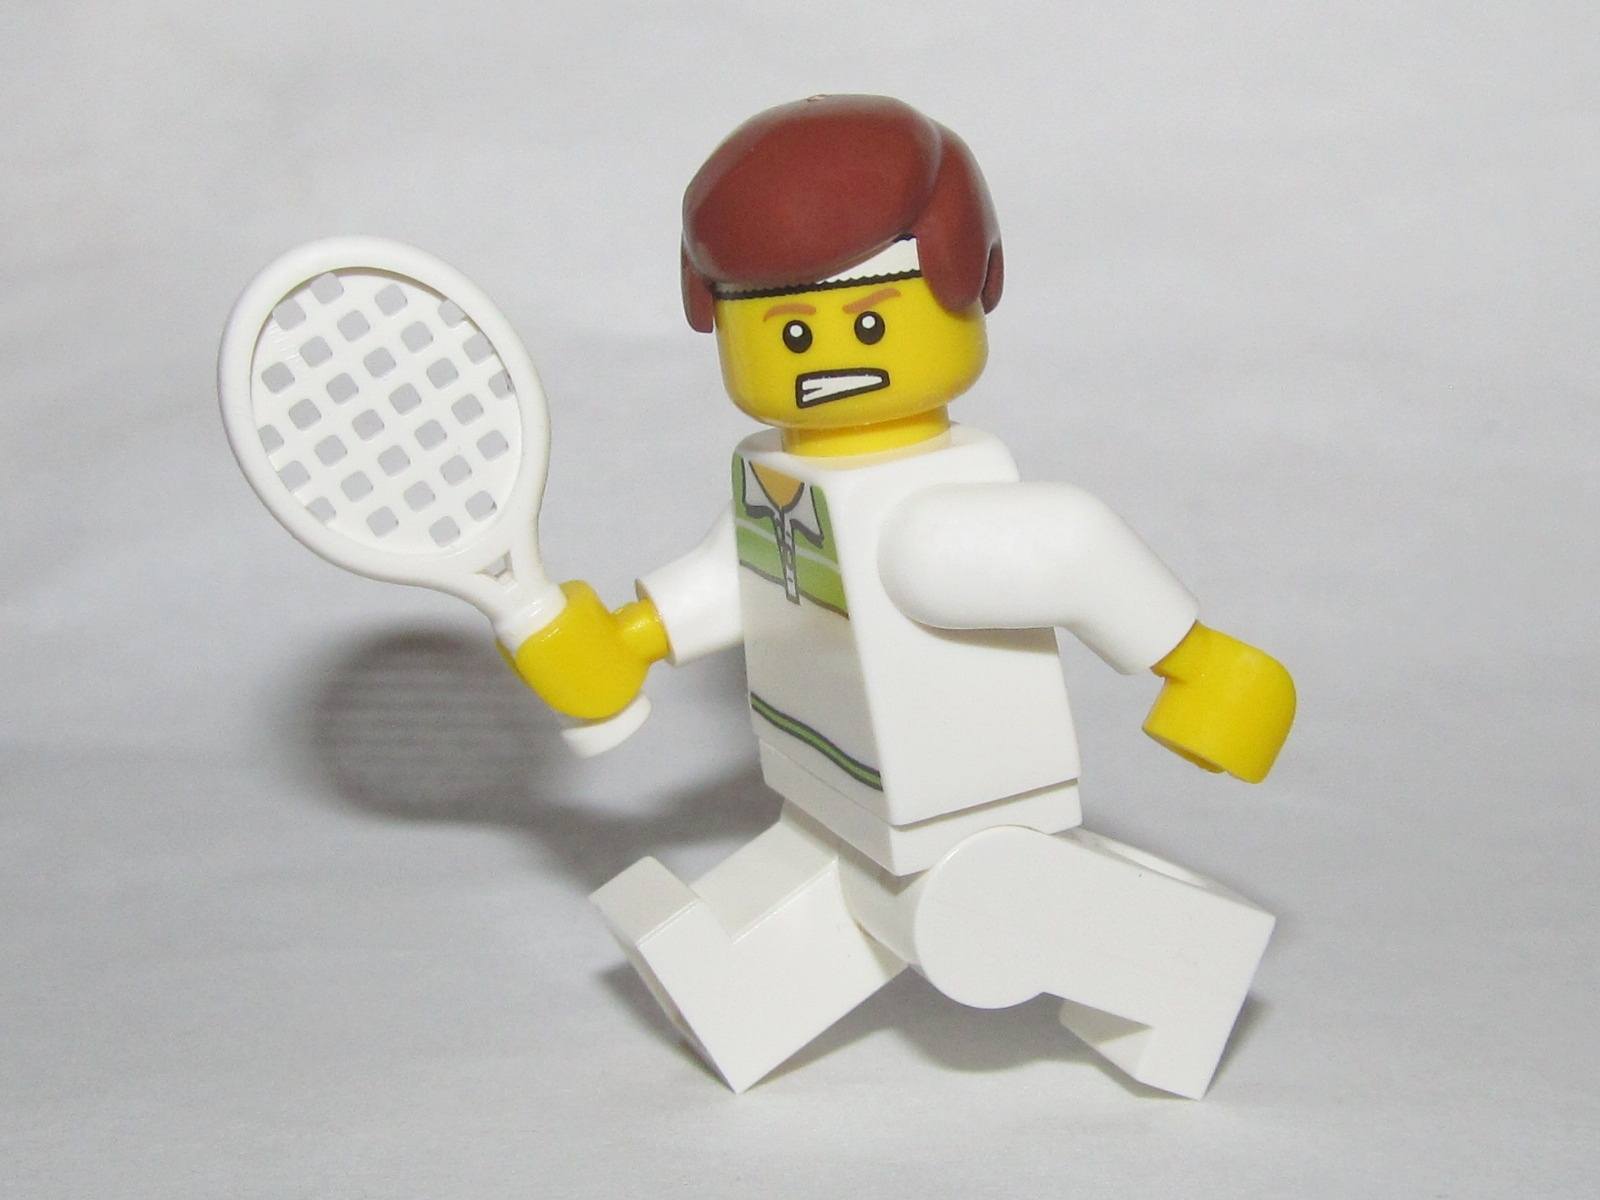 The more you move, the more calories you use, the higher your TDEE. Which is why this LEGO loves to play tennis!